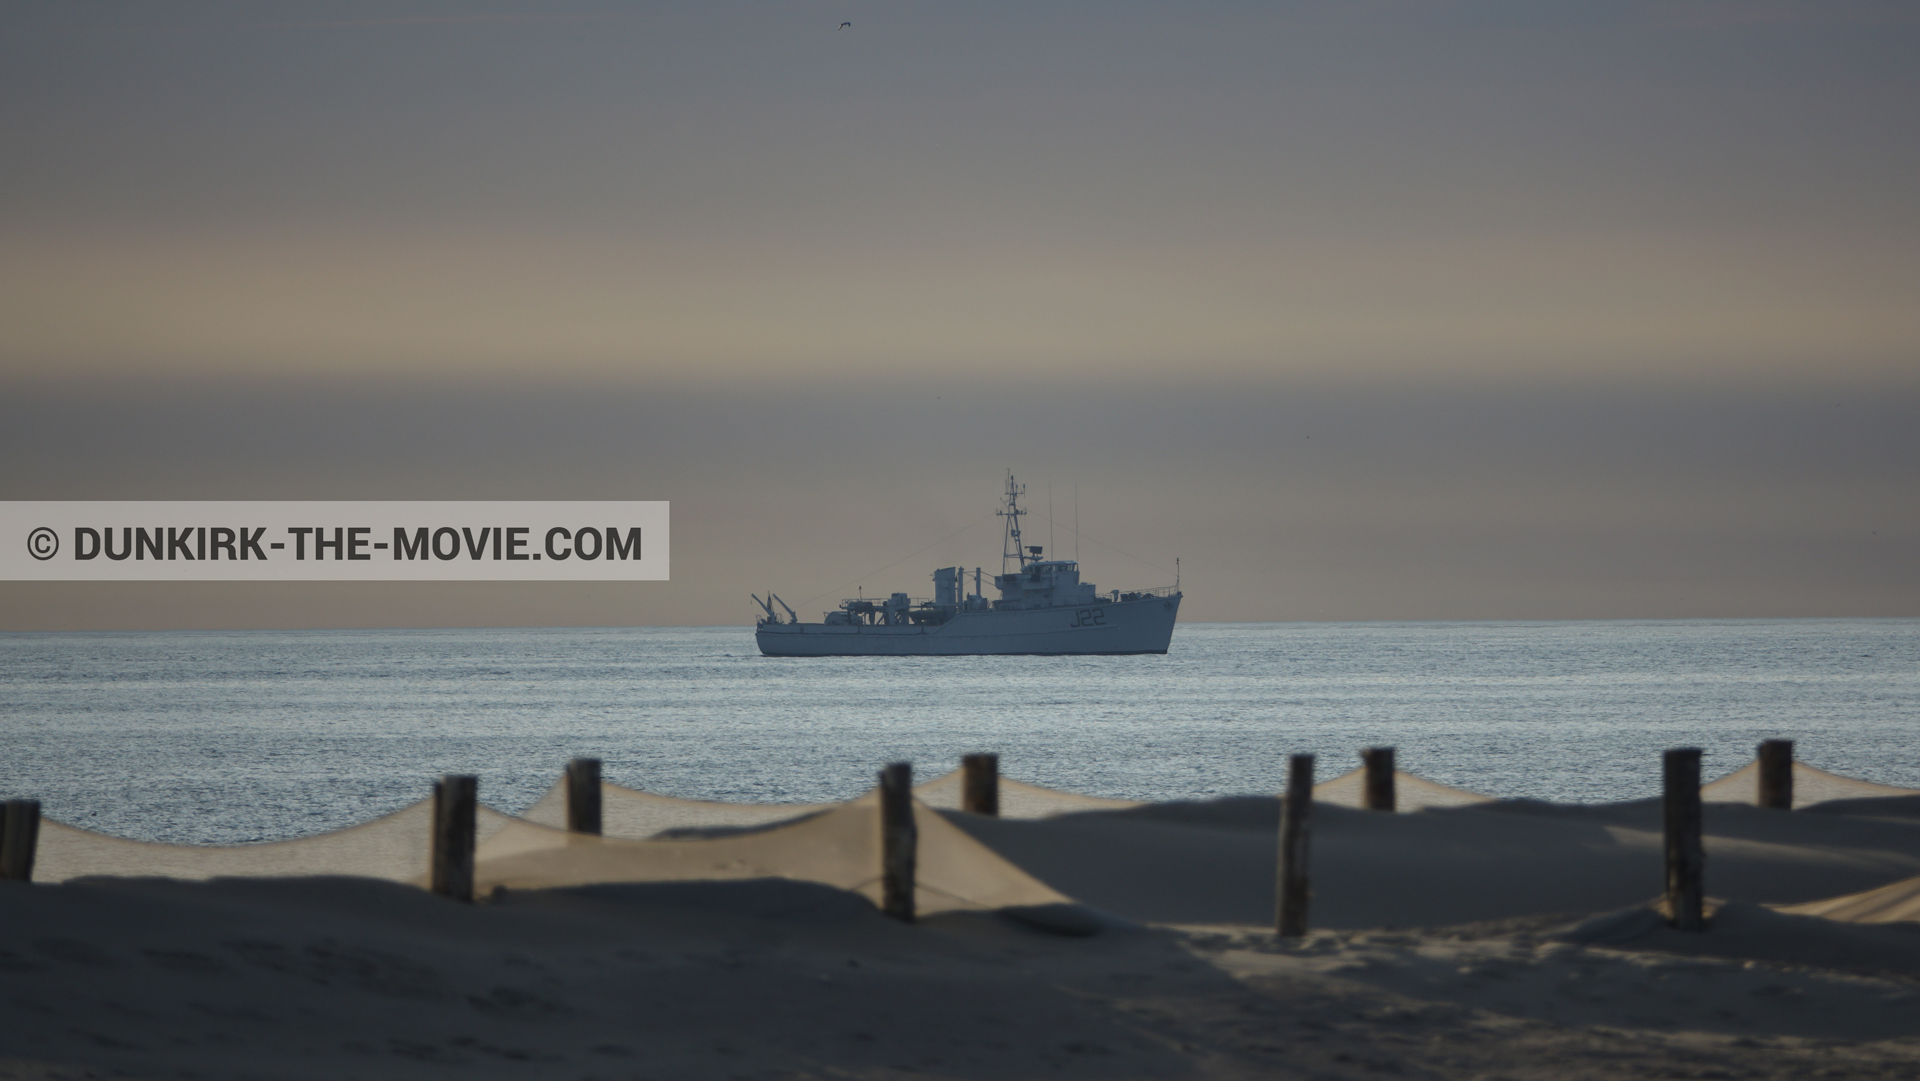 Picture with orange sky, J22 -Hr.Ms. Naaldwijk, calm sea, beach,  from behind the scene of the Dunkirk movie by Nolan